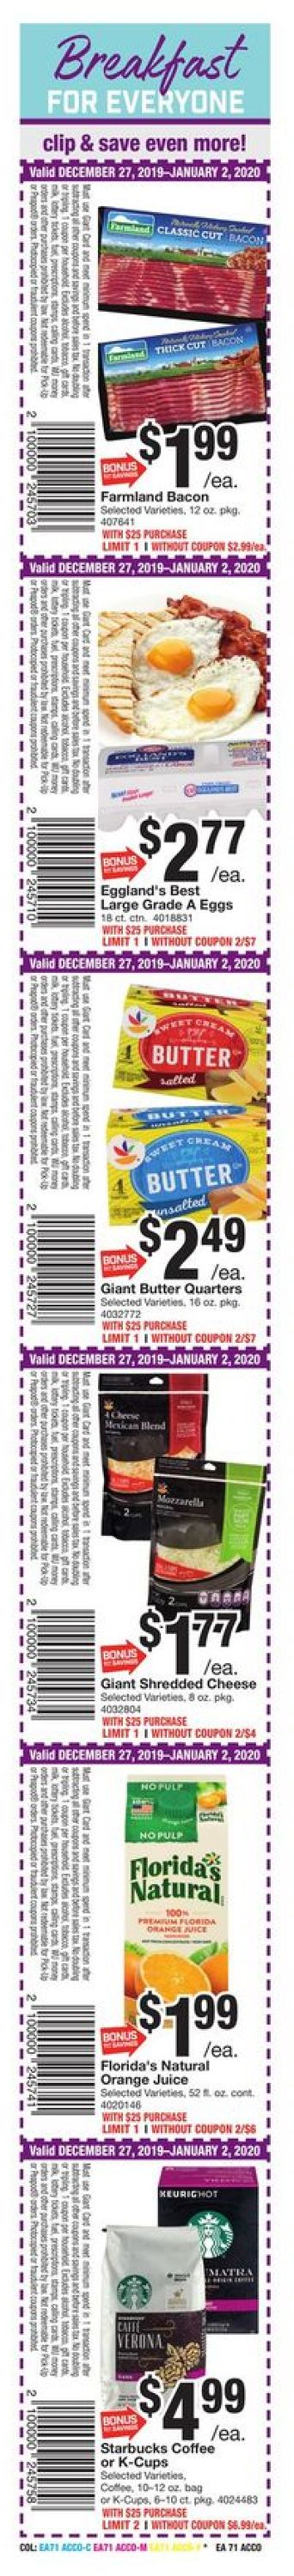 Giant Food - New Year's Ad 2019/2020 Weekly Ad Circular - valid 12/27-01/02/2020 (Page 2)